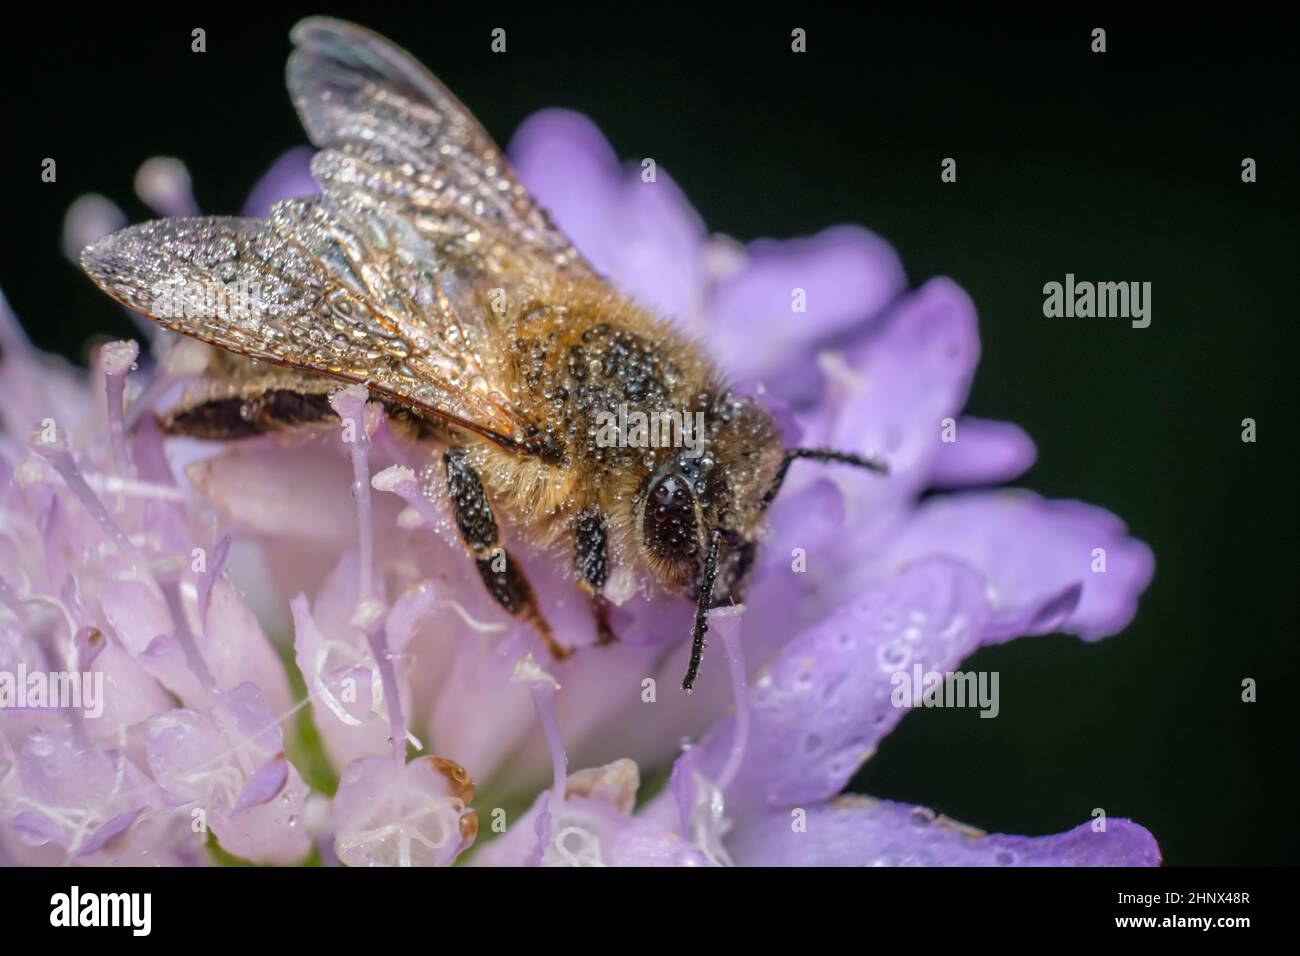 Honey bee in early morning dew on a flower close-up Stock Photo